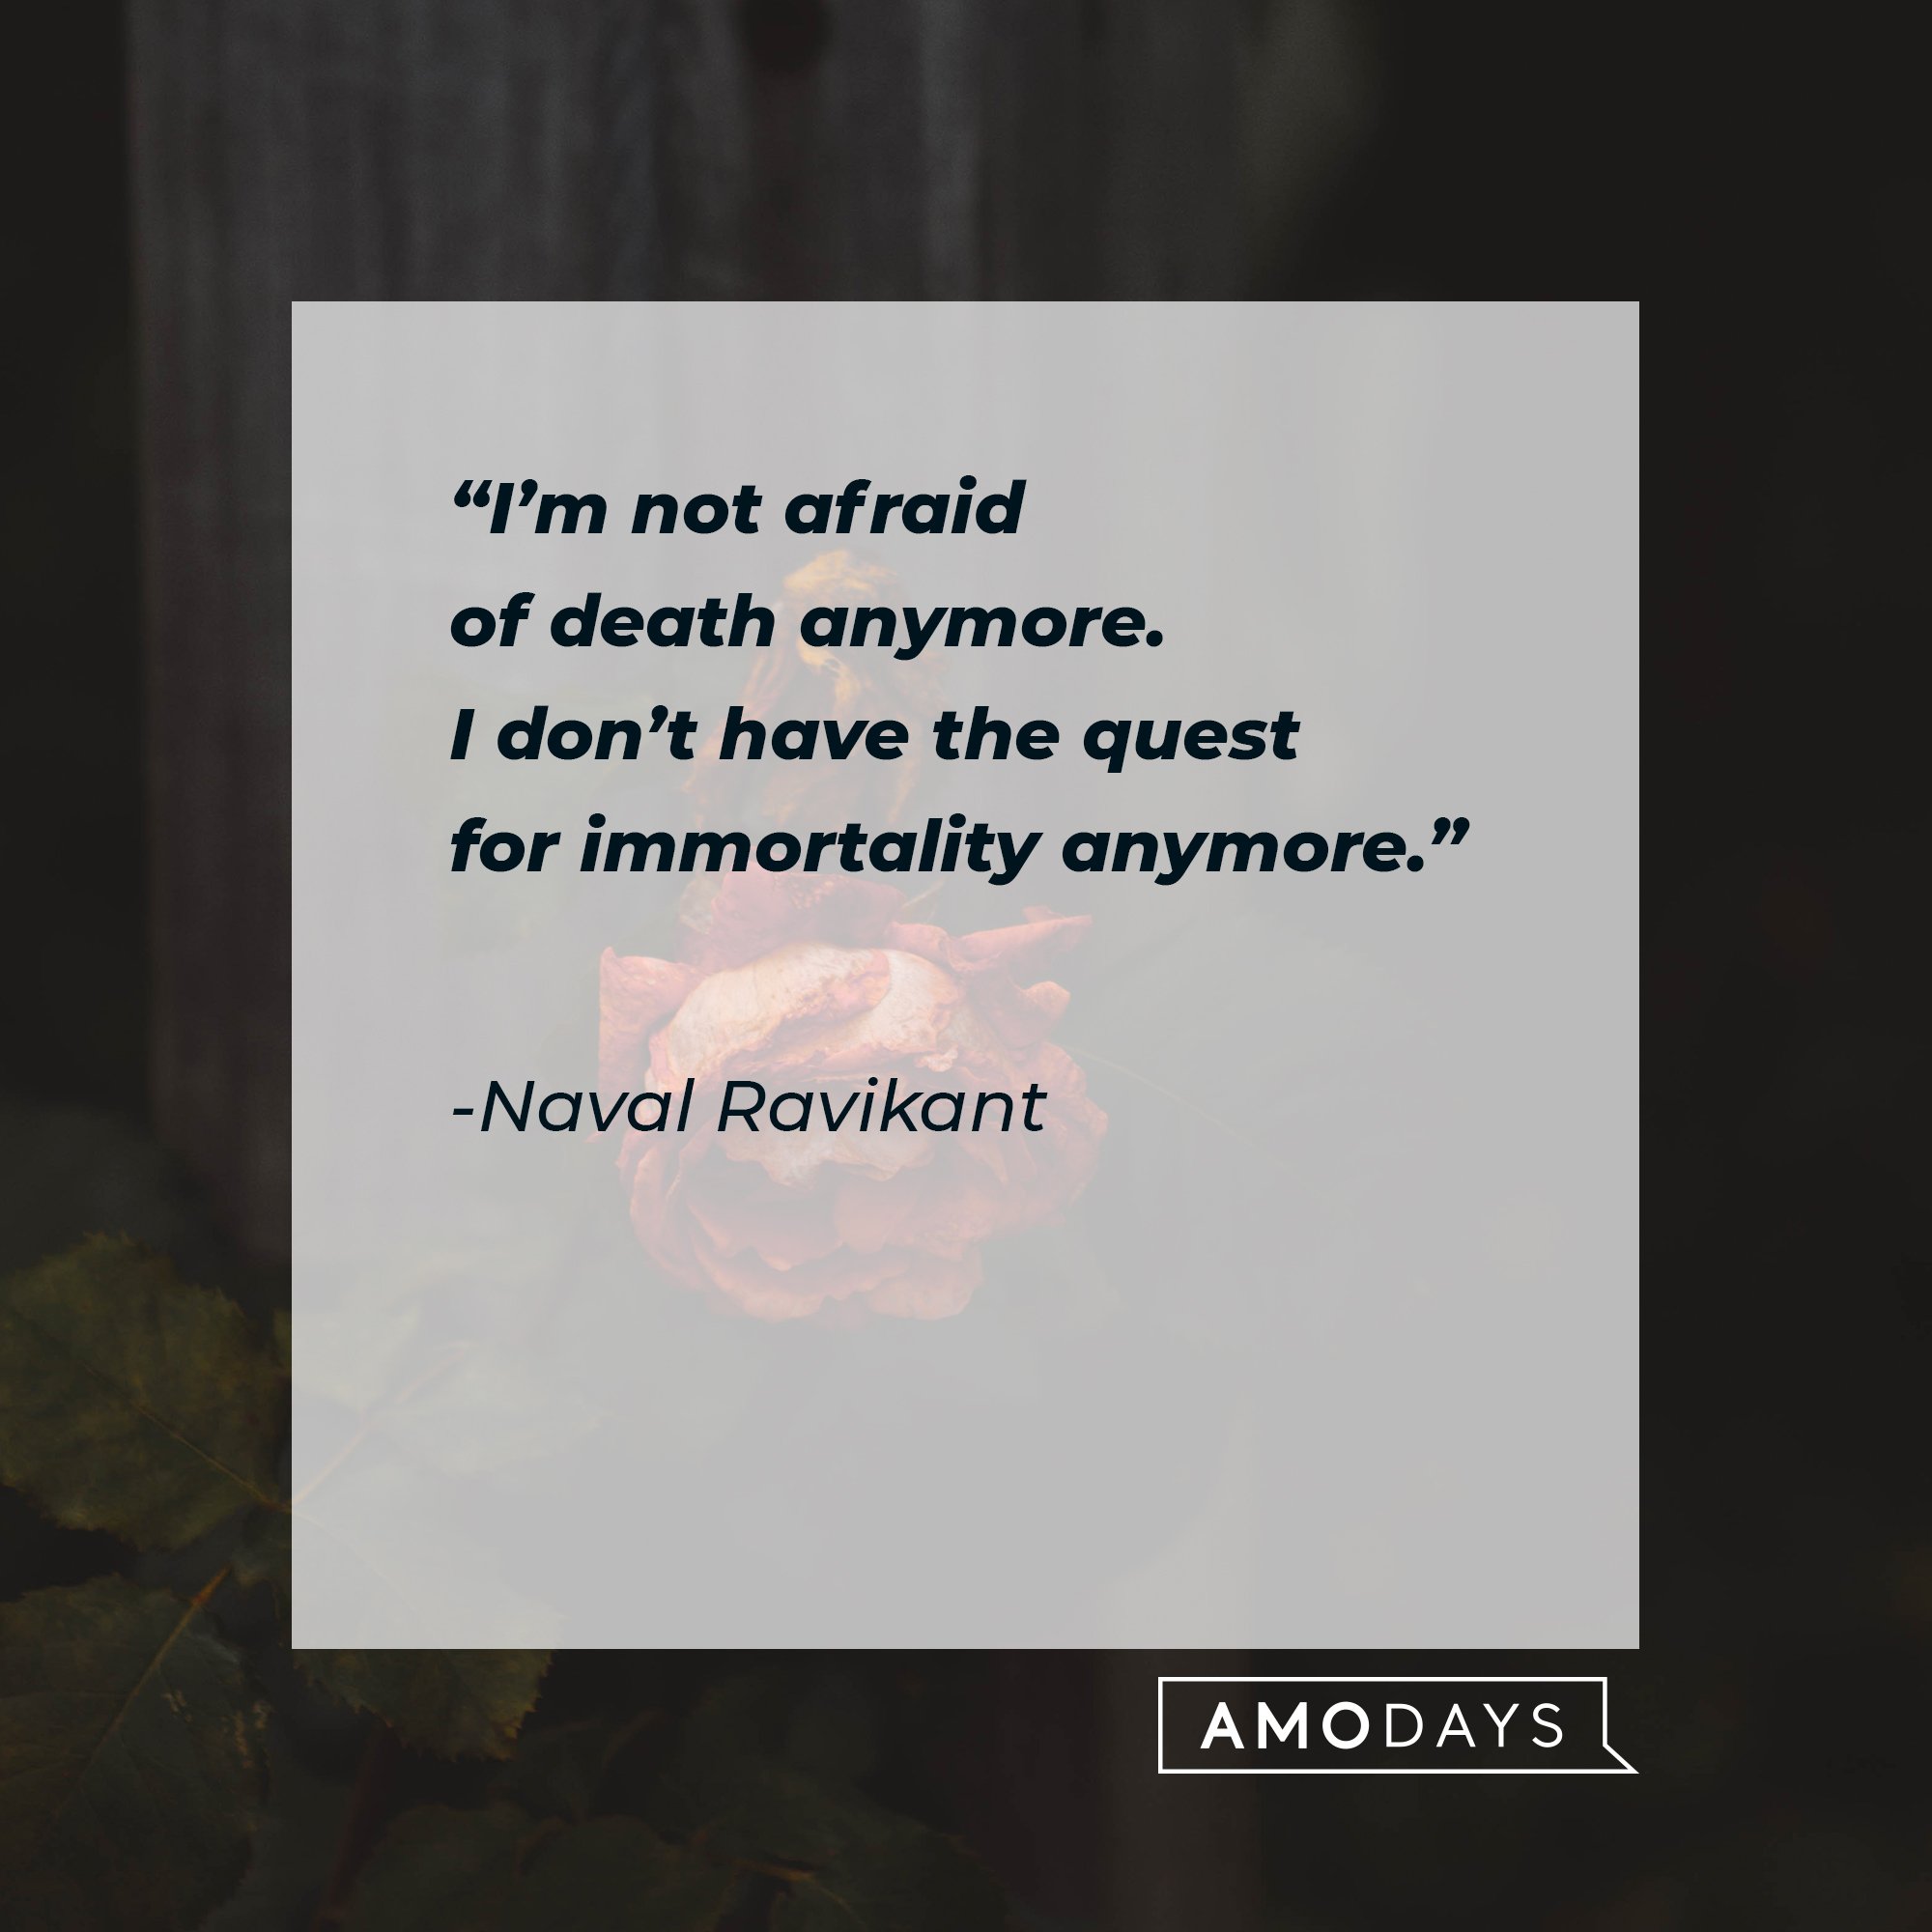 Naval Ravikant's quote: "I’m not afraid of death anymore. I don’t have the quest for immortality anymore." | Image: AmoDays